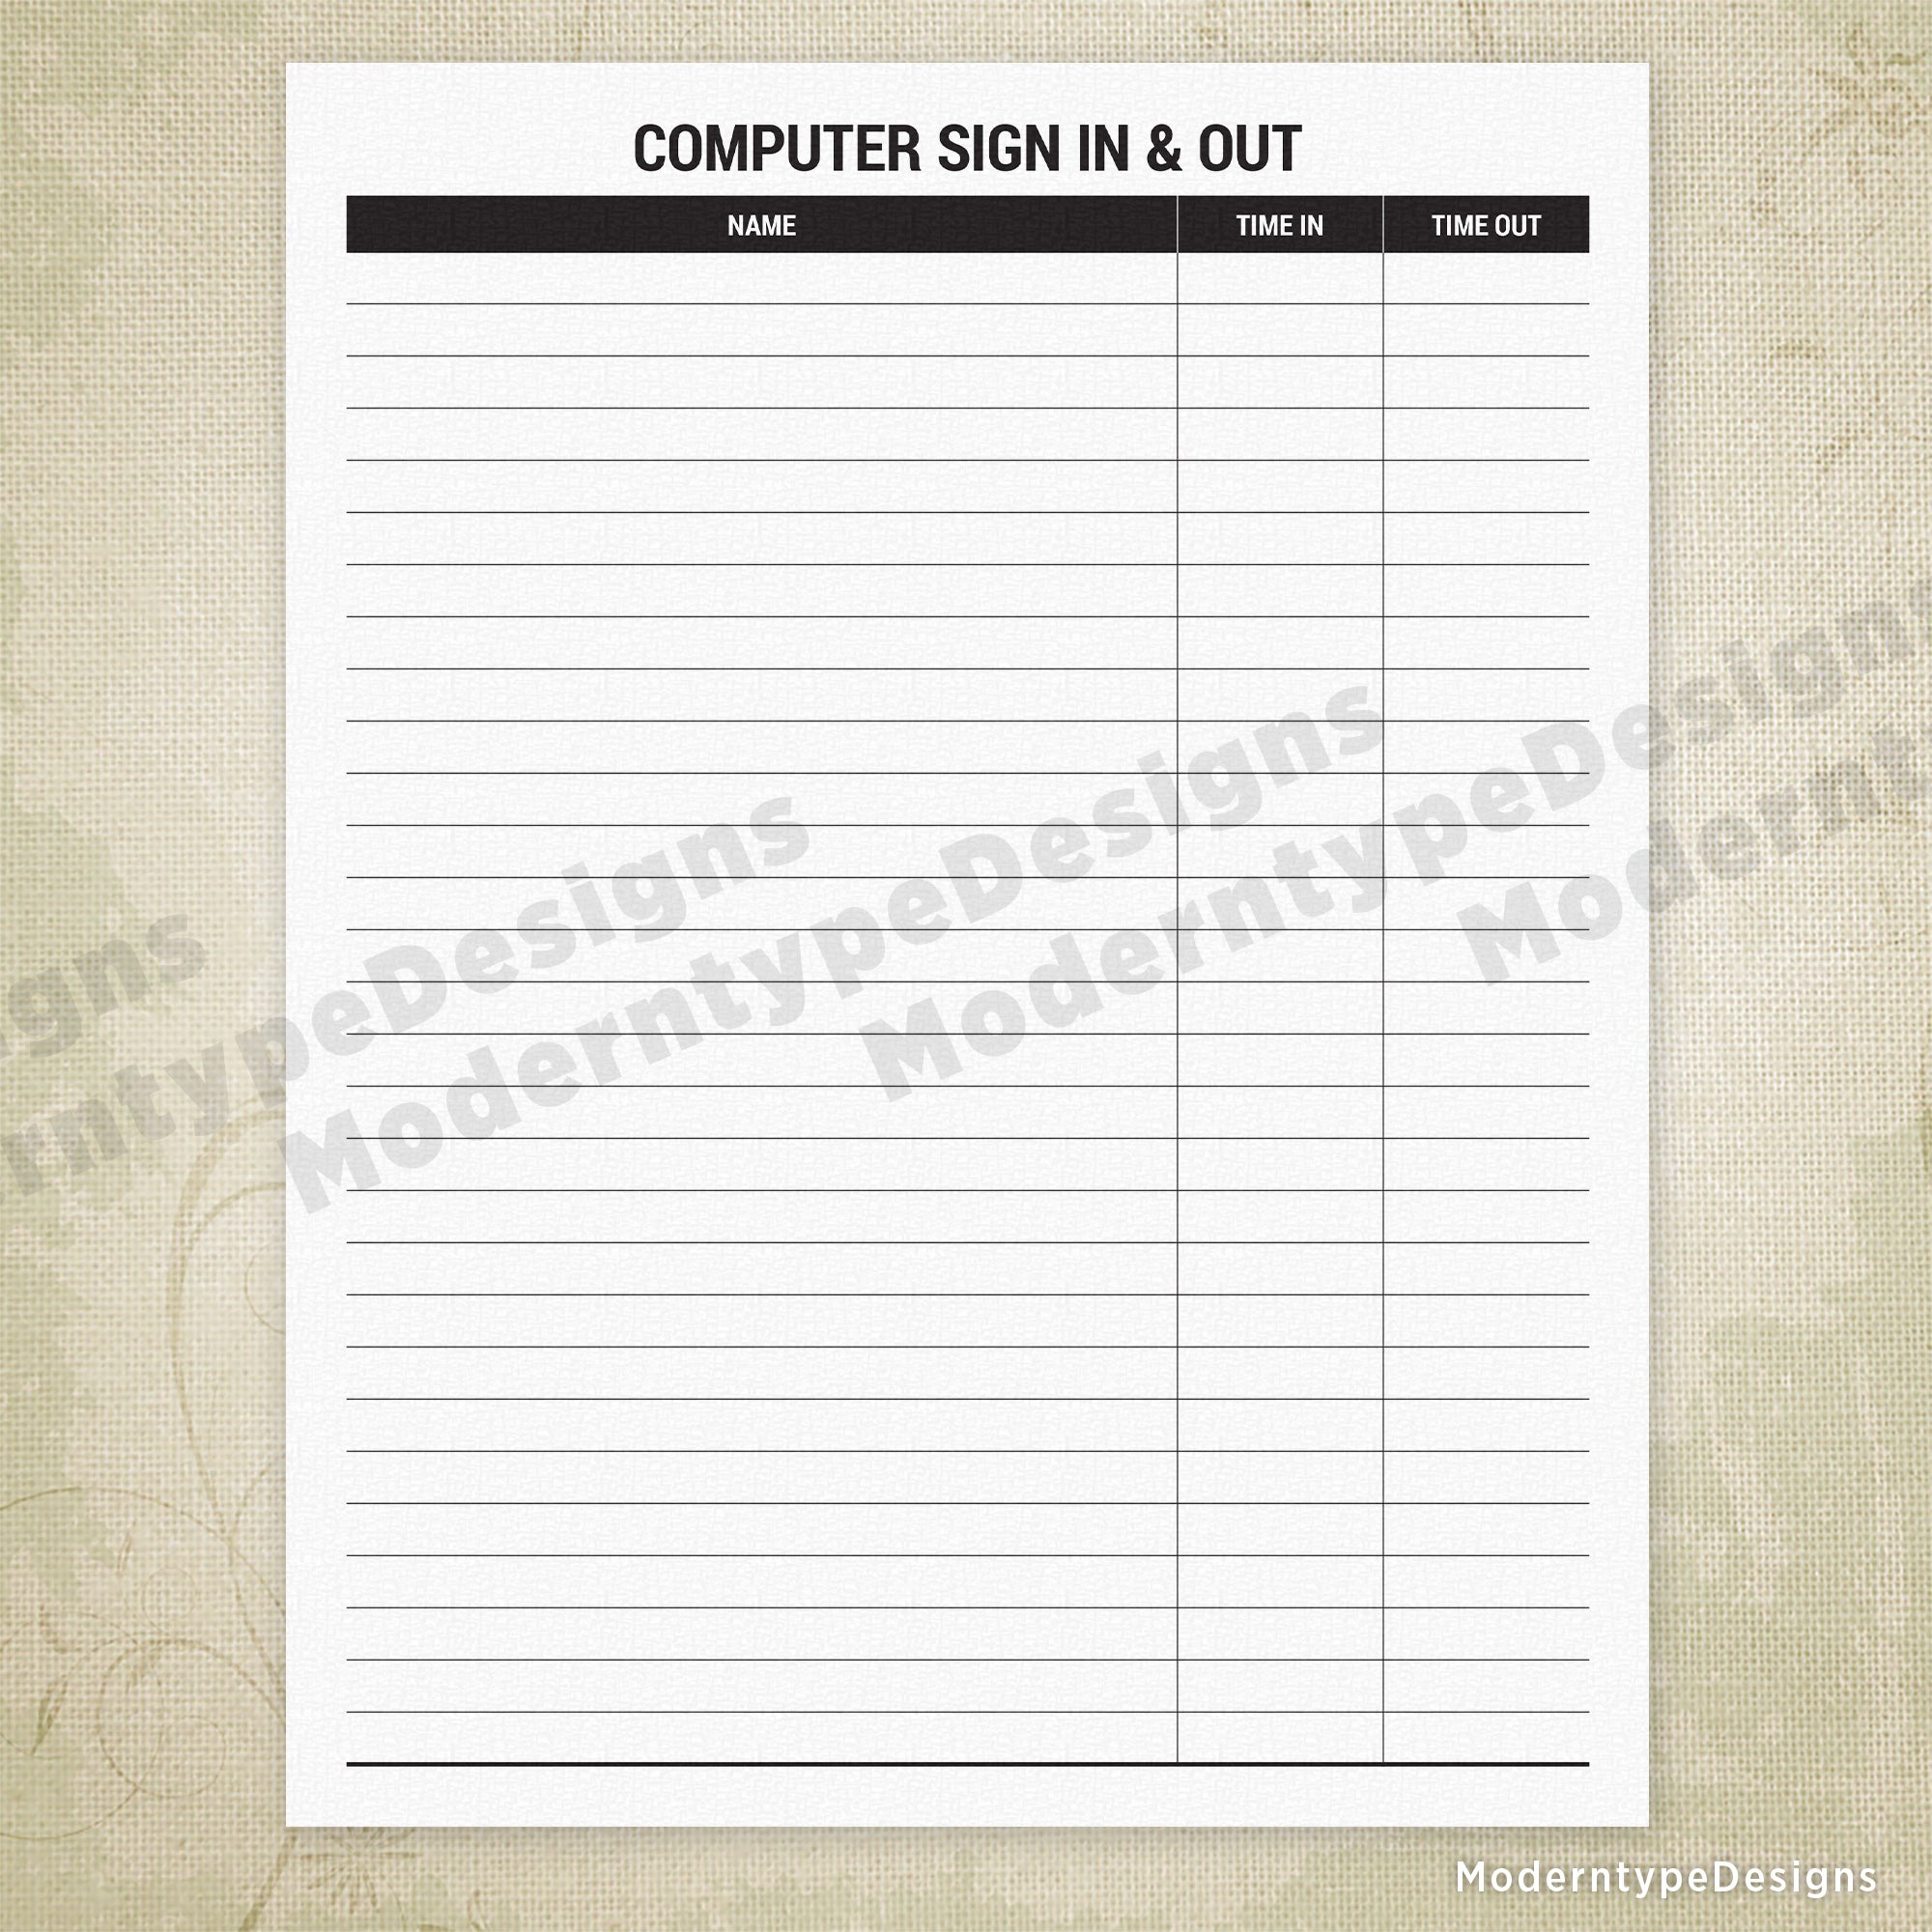 Computer Sign In & Out Printable Form